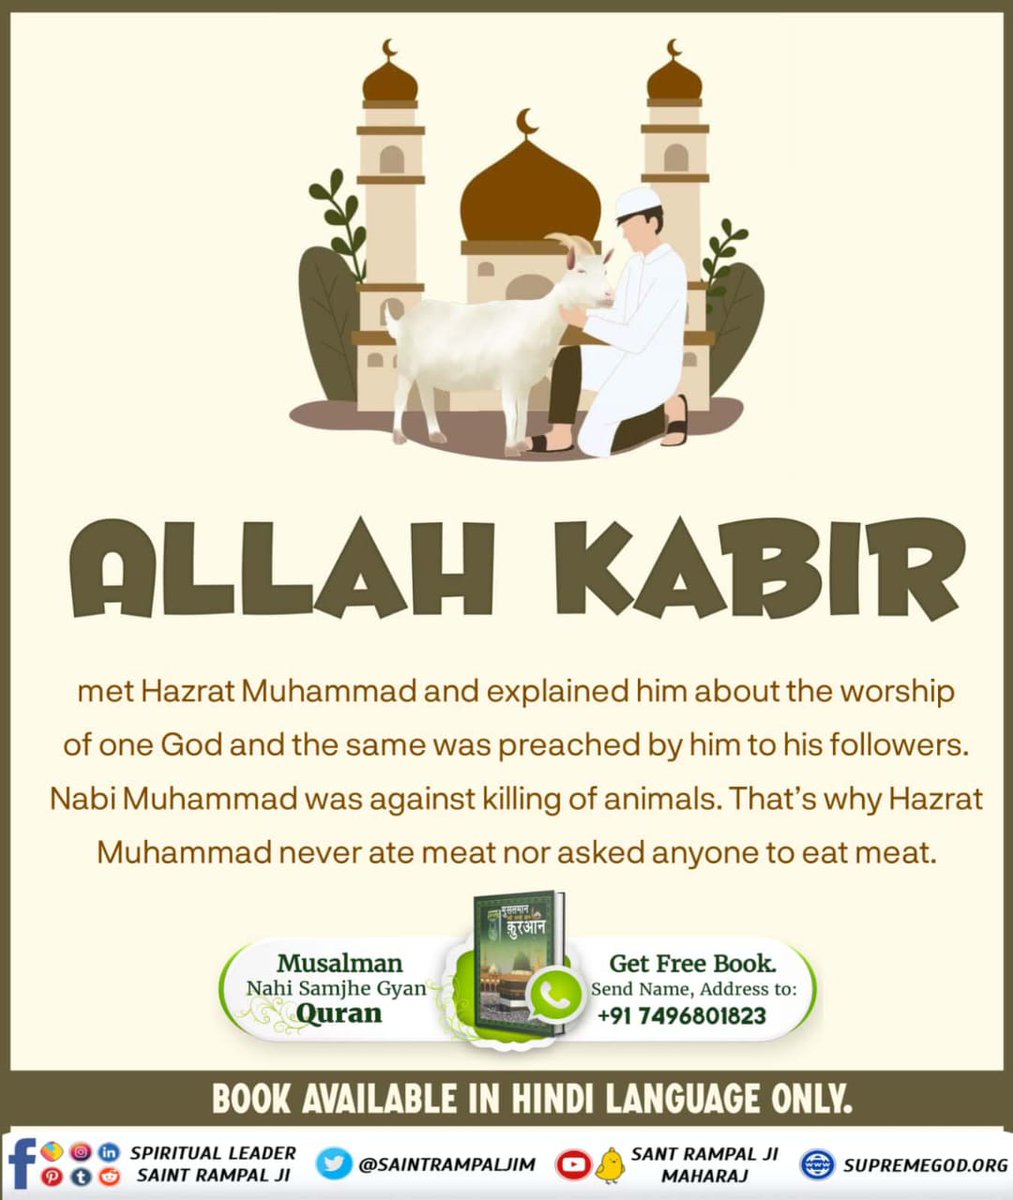 #मांस_खाना_हराम
Hazrat Muhammad Ji never committed violence against any living being and did not eat meat.
BaaKhabar Sant Rampal Ji